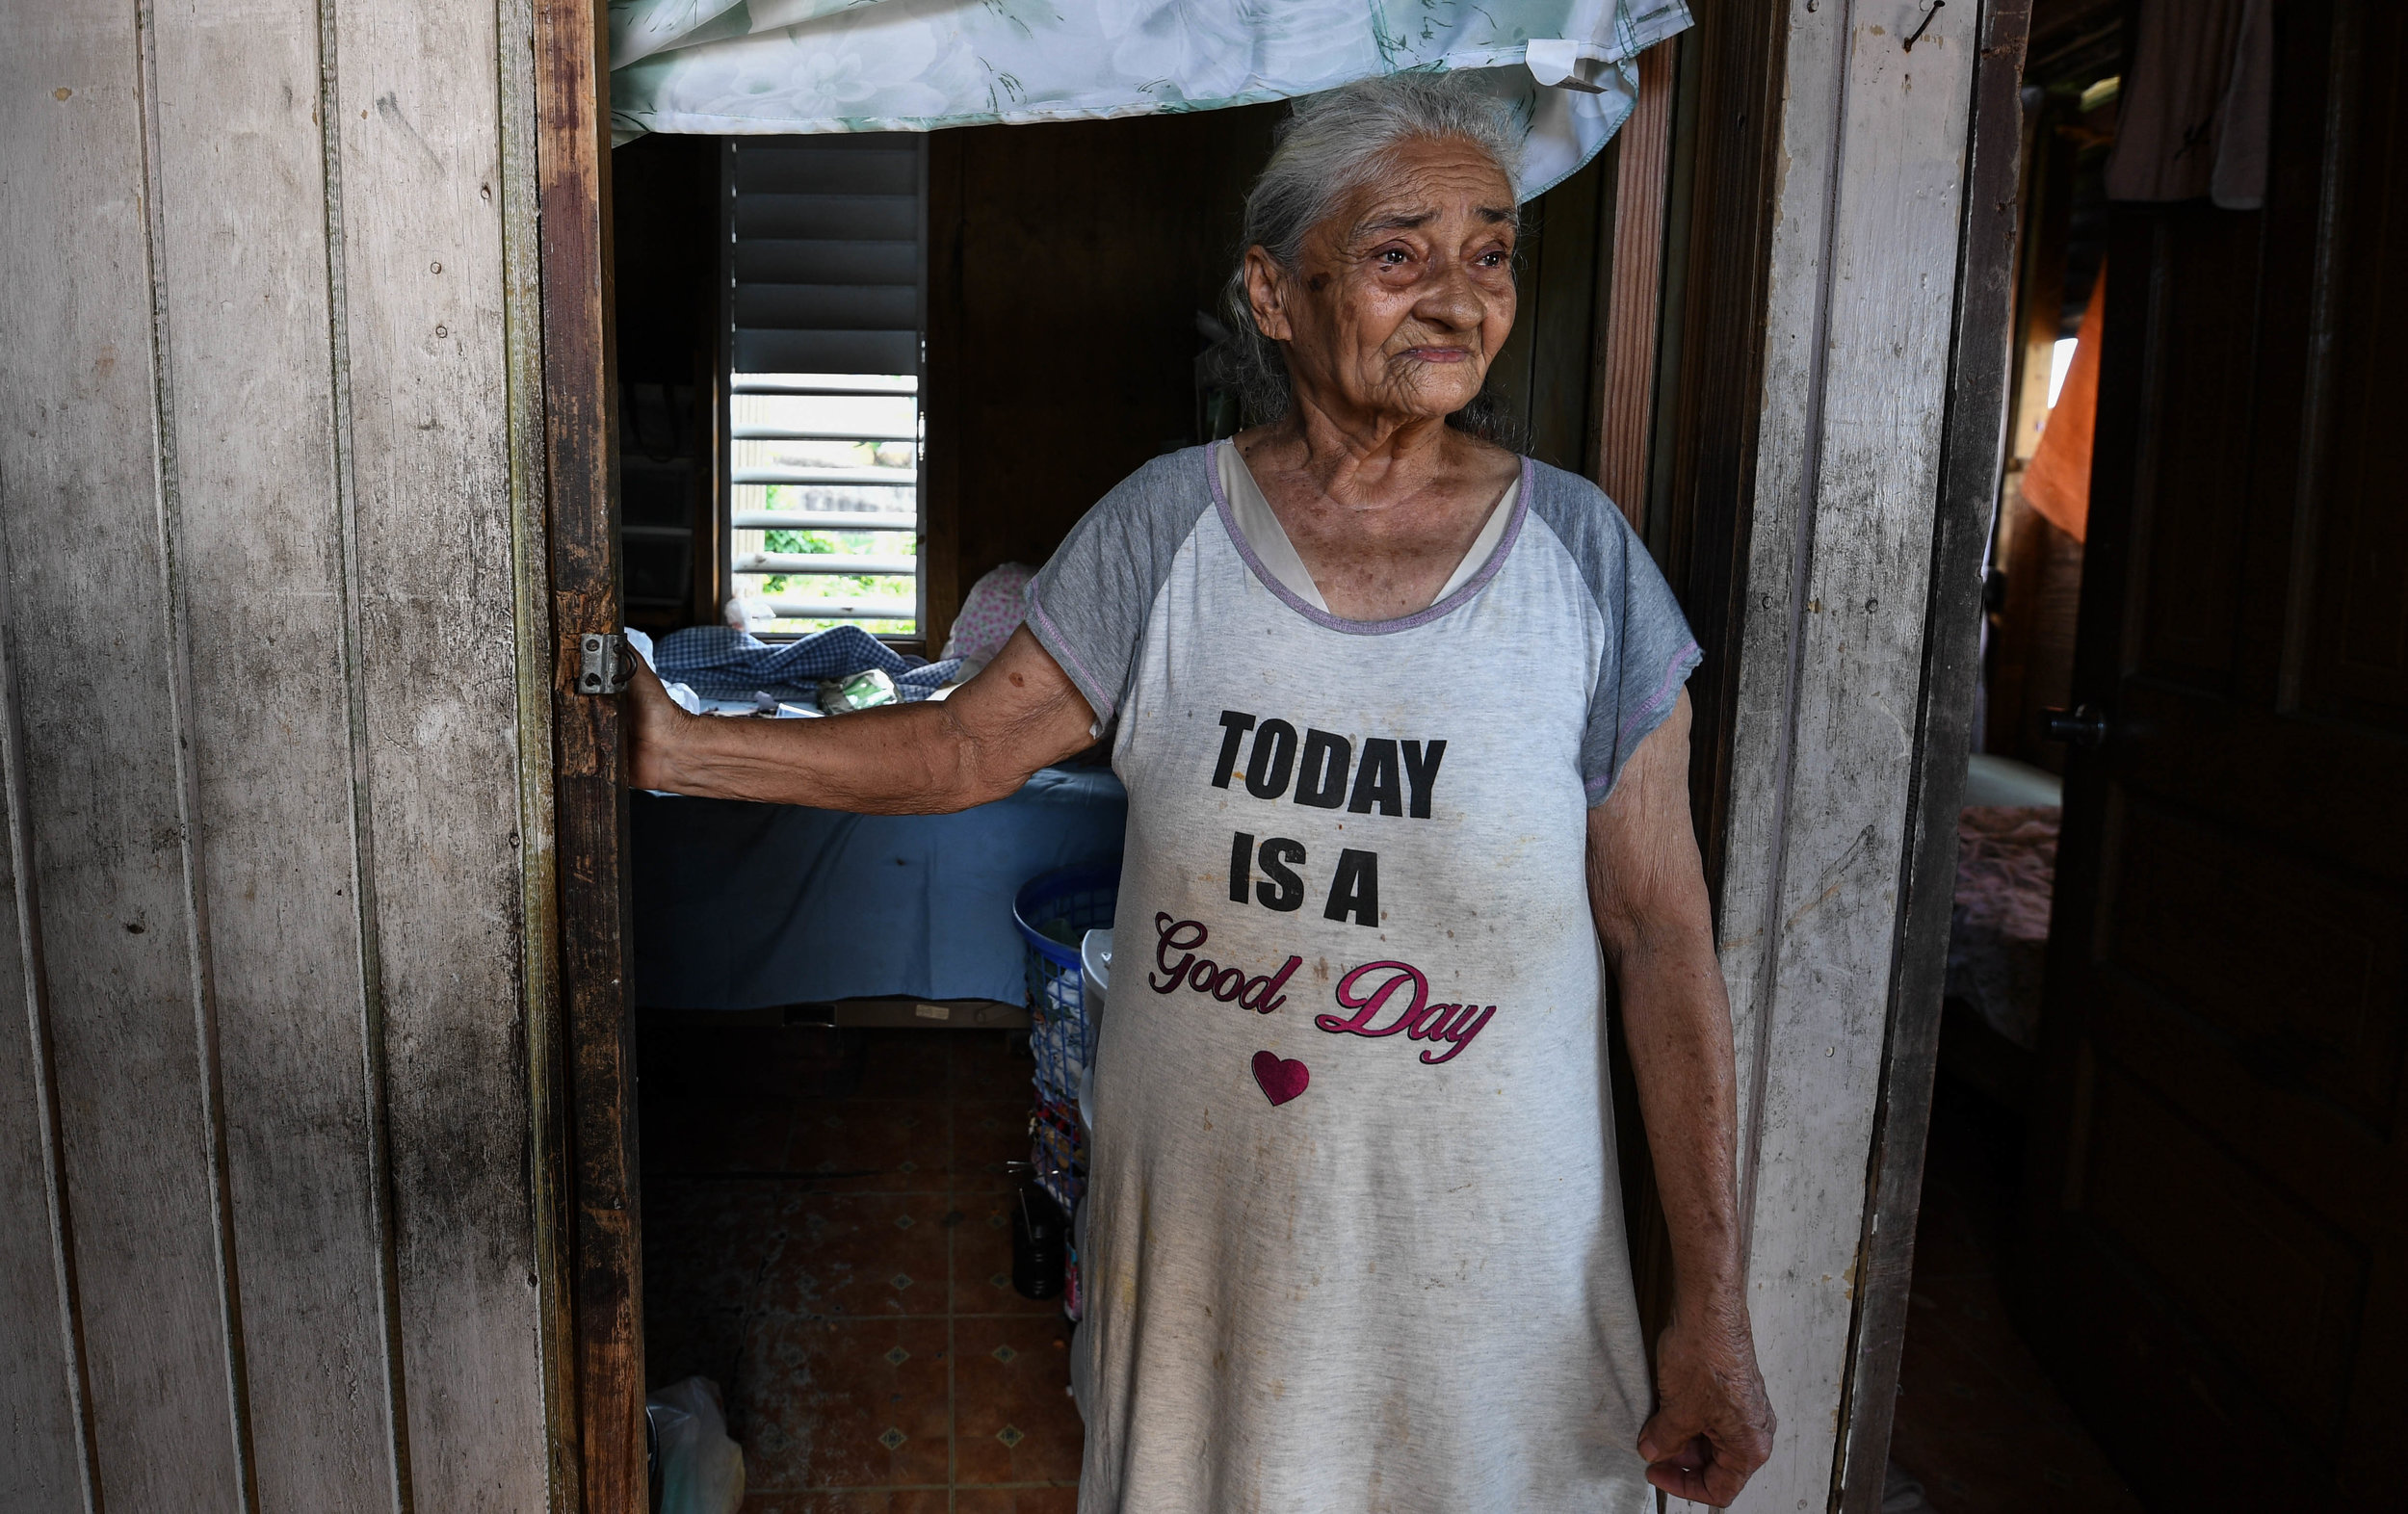  Paola Ortiz, 84, has been alone for three months, wearing the single item of clothing she has left, a T-shirt that says, "Today is a good day." In the mountain village Moca with no car, she has not yet received aid. "I've always been poor," said Ort